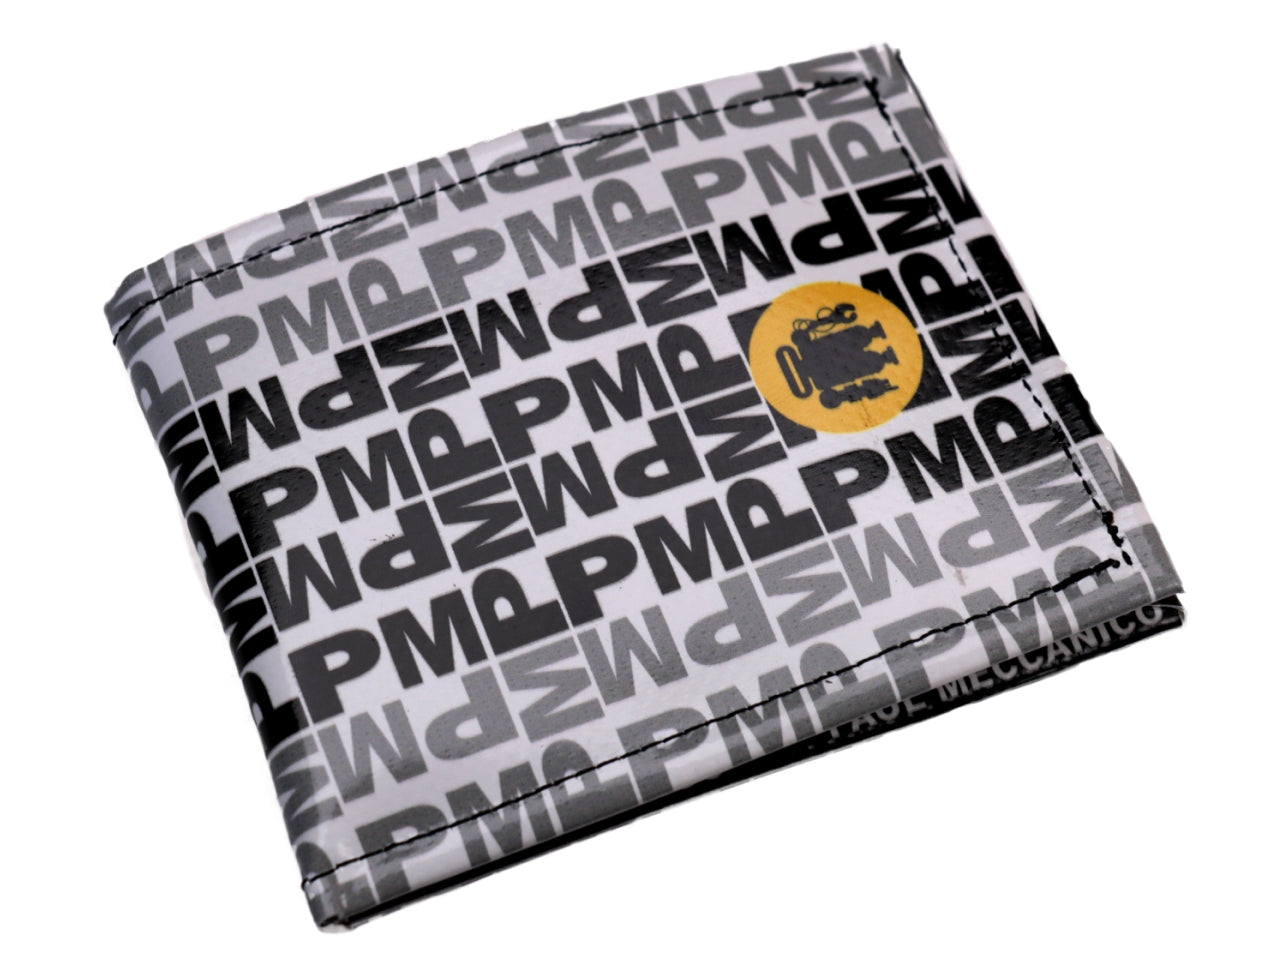 MEN'S WALLET BLACK AND WHITE LETTERING FANTASY. MODEL CRIK MADE OF LORRY TARPAULIN. - Limited Edition Paul Meccanico